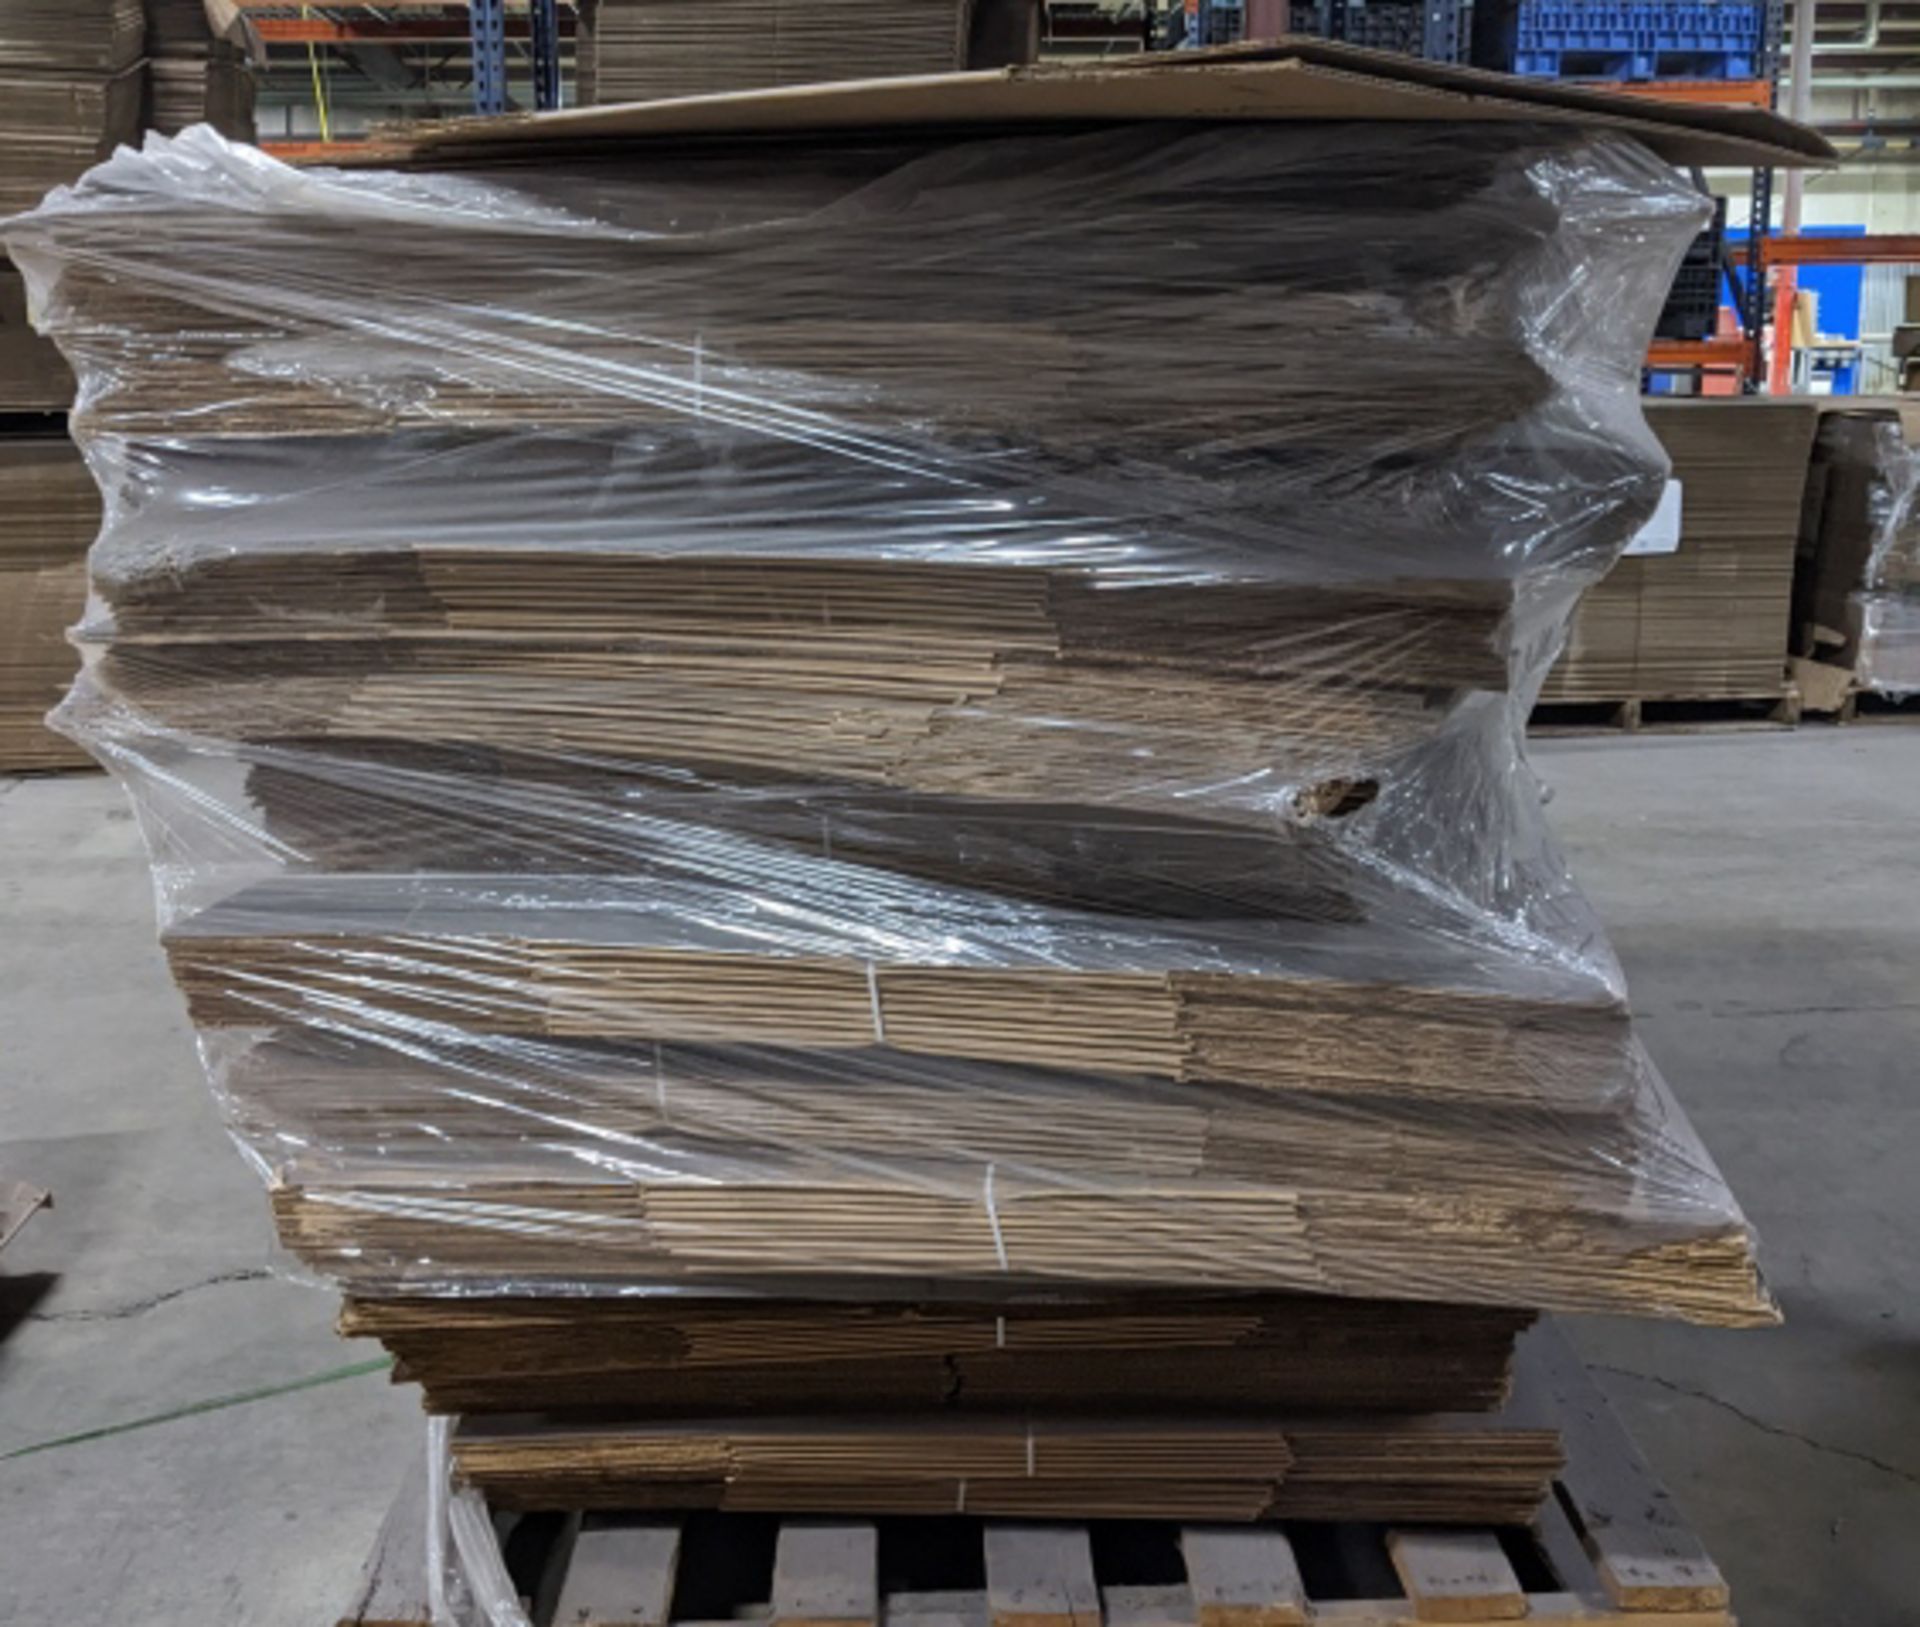 Pallet of Uline 25 x 25 x 20 Shipping Boxes.